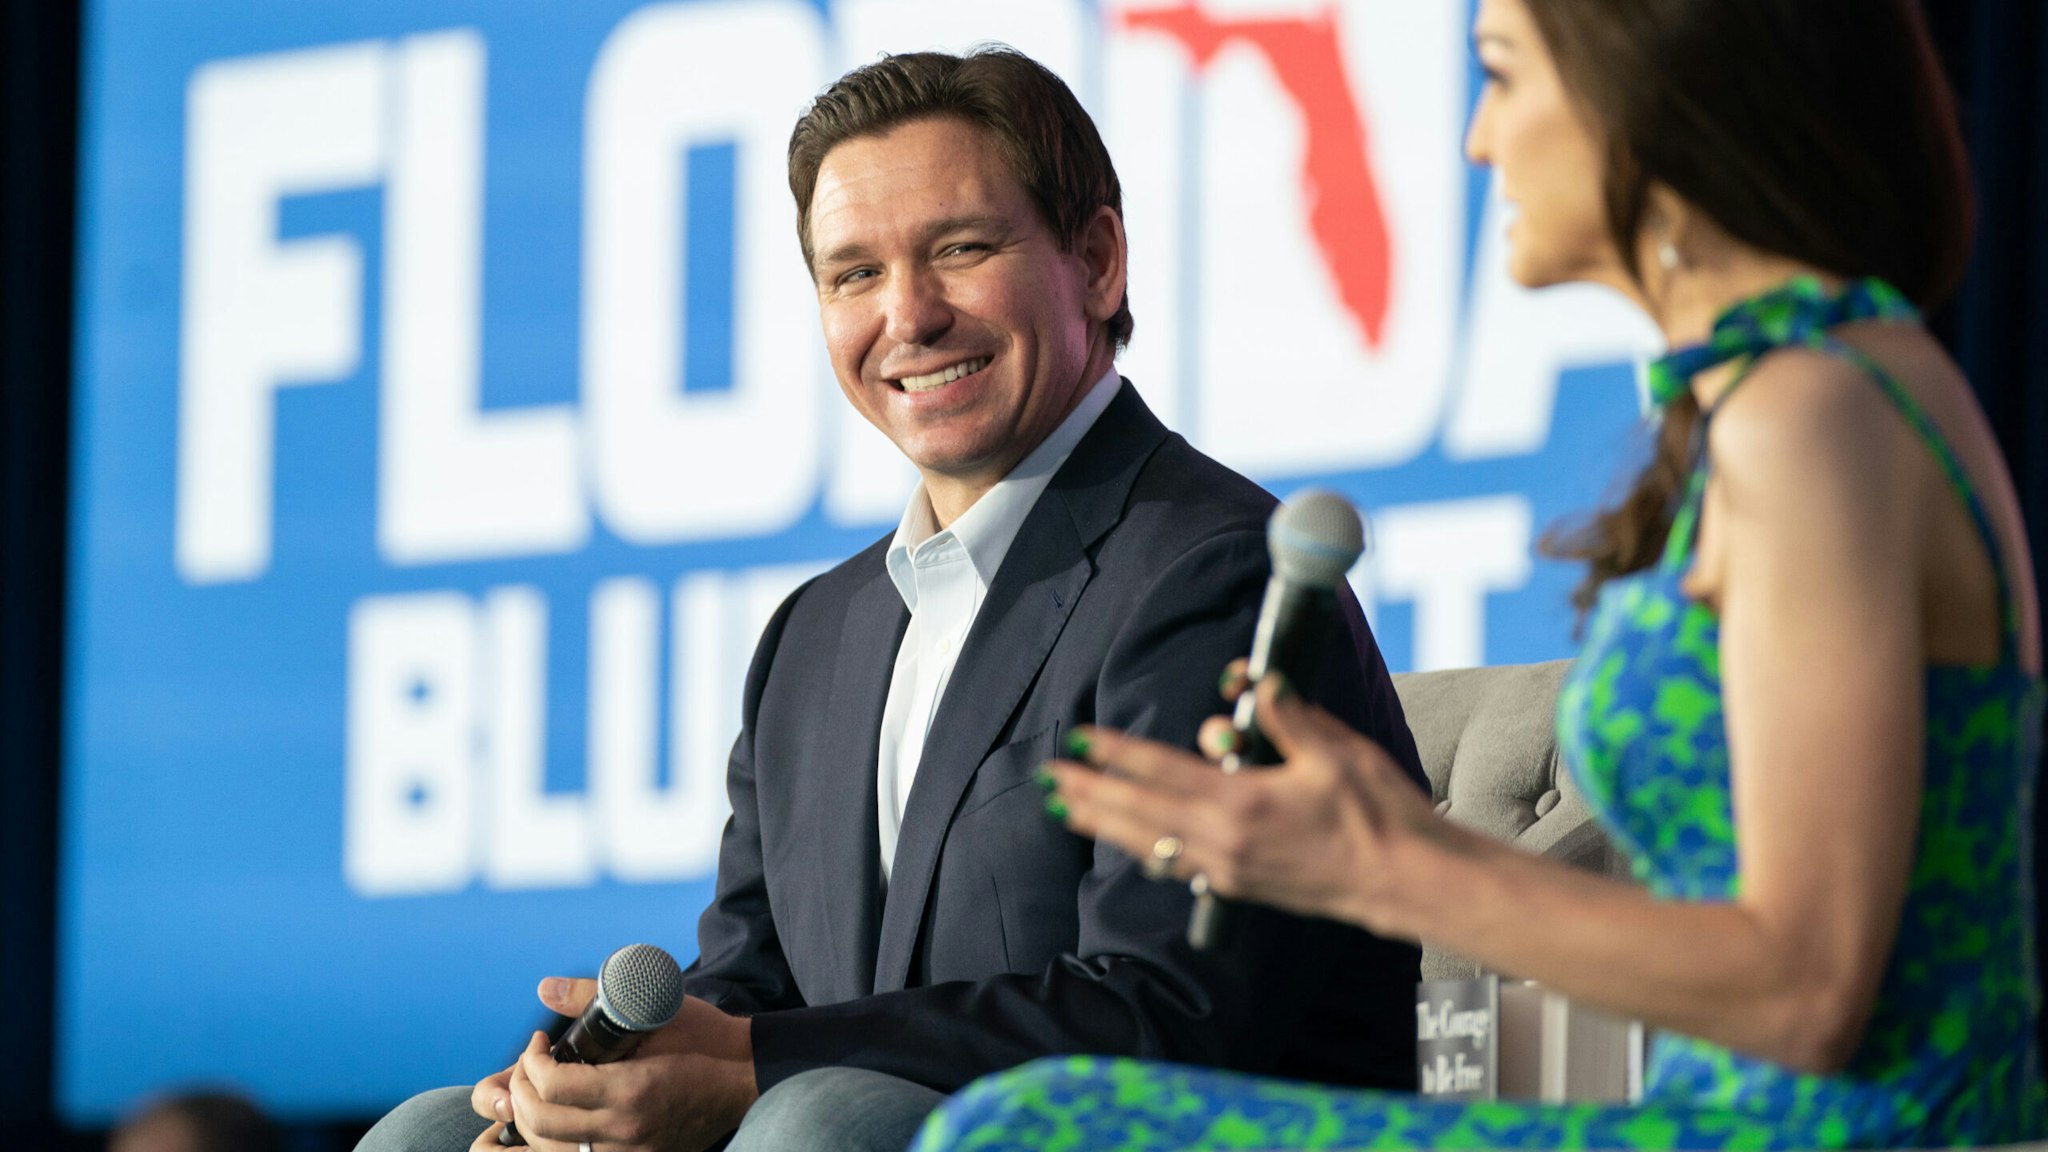 NORTH CHARLESTON, SC - APRIL 19: Florida Governor Ron DeSantis, left, and his wife, Casey DeSantis, speak to a crowd at the North Charleston Coliseum on April 19, 2023 in North Charleston, South Carolina. The Governor's appearance marks his first official visit to the "First in the South" presidential primary state amid mounting anticipation of his 2024 presidential candidacy.